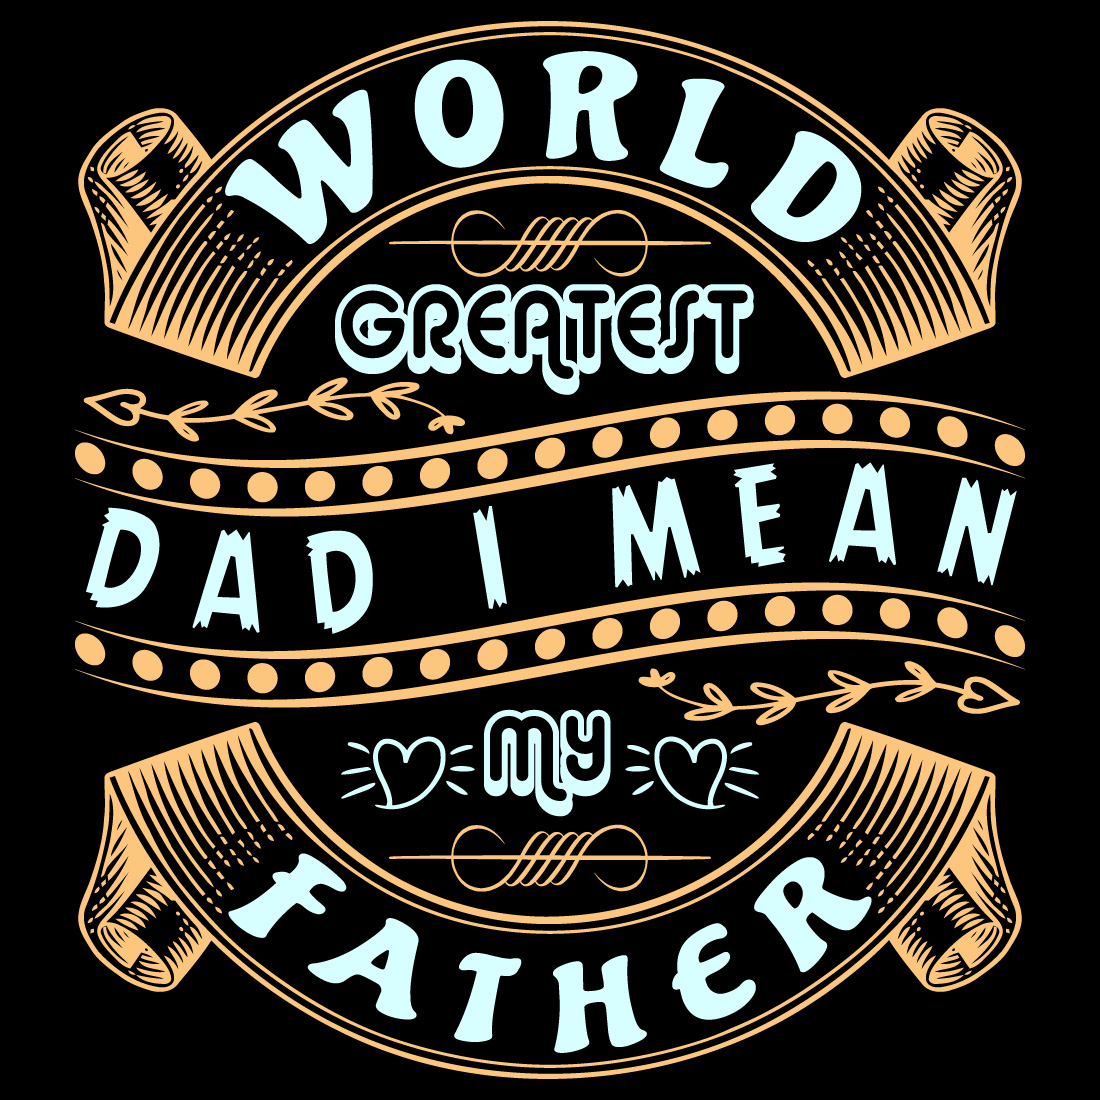 Father's day t - shirt with the words world greatest dad i mean.